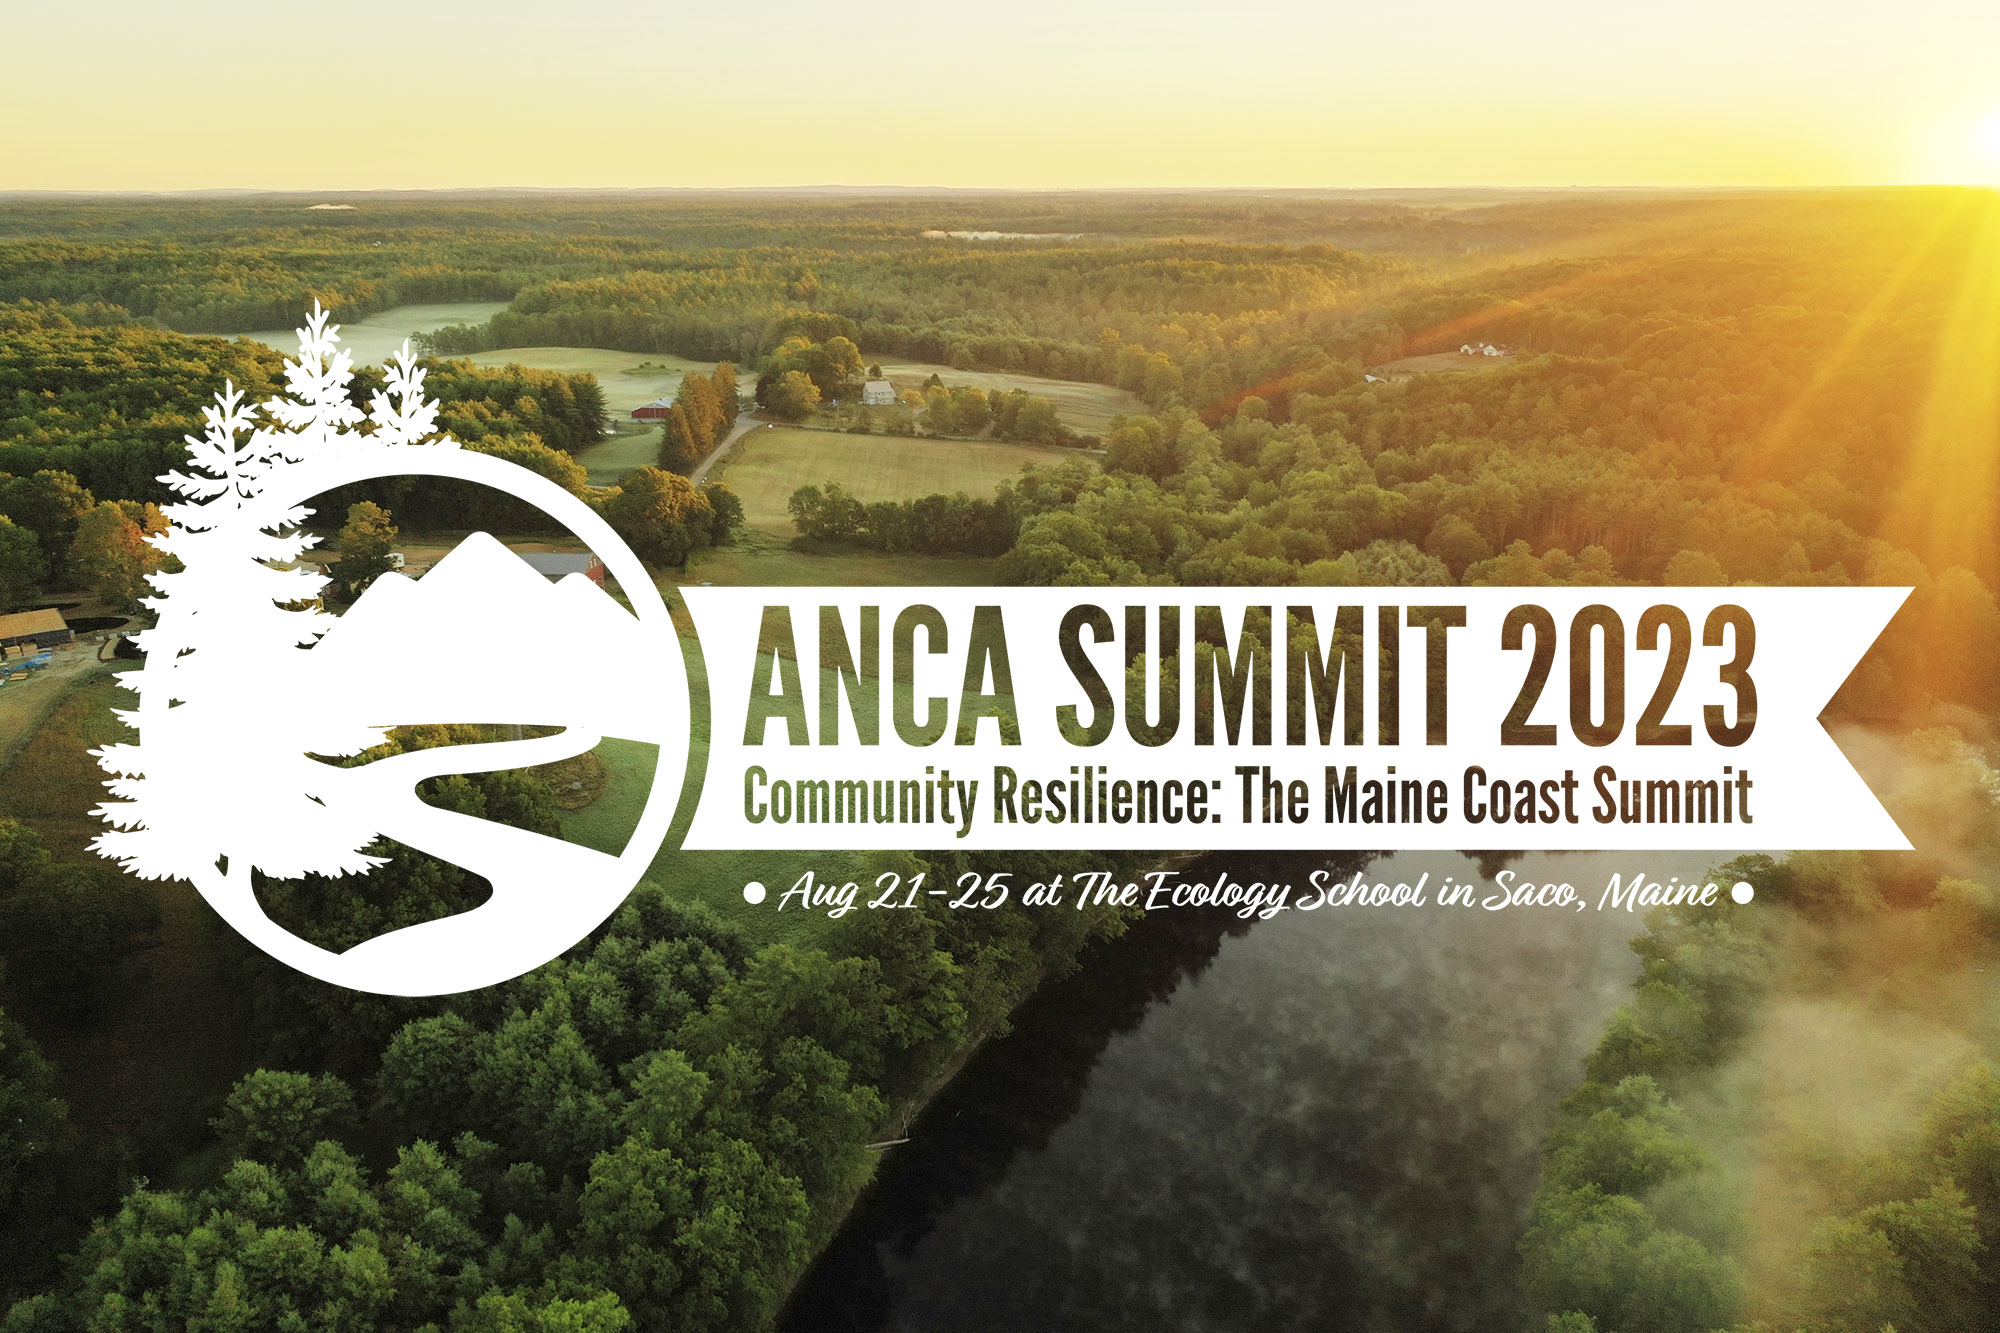 ANCA Summit 2023 — Community Resilience: The Maine Coast Summit / August 21-25 at The Ecology School in Saco, Maine